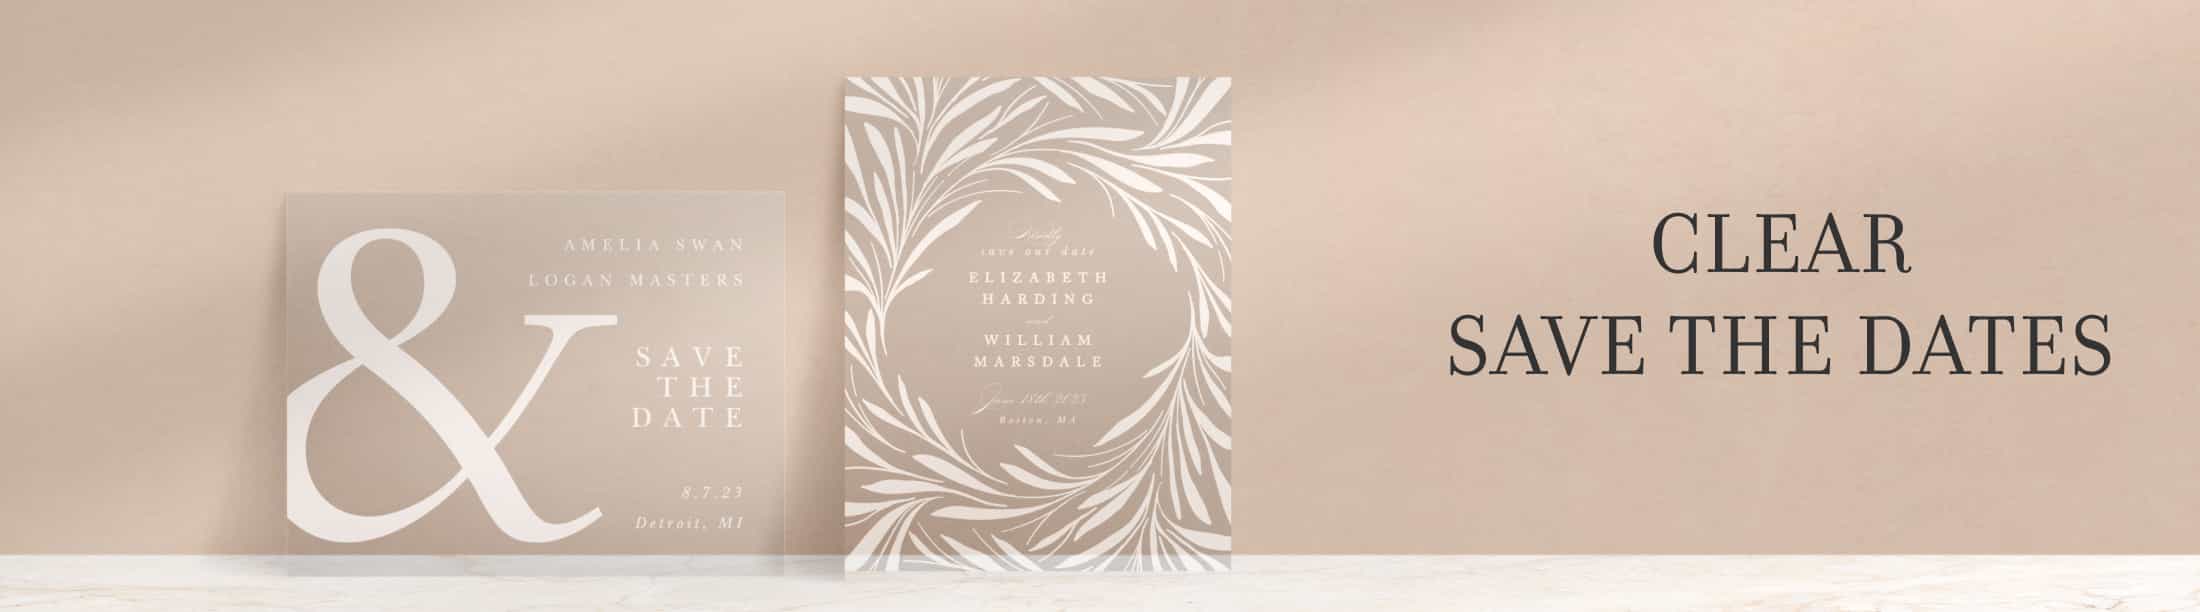 Clear Wedding Save The Date Cards | Design Instantly Online